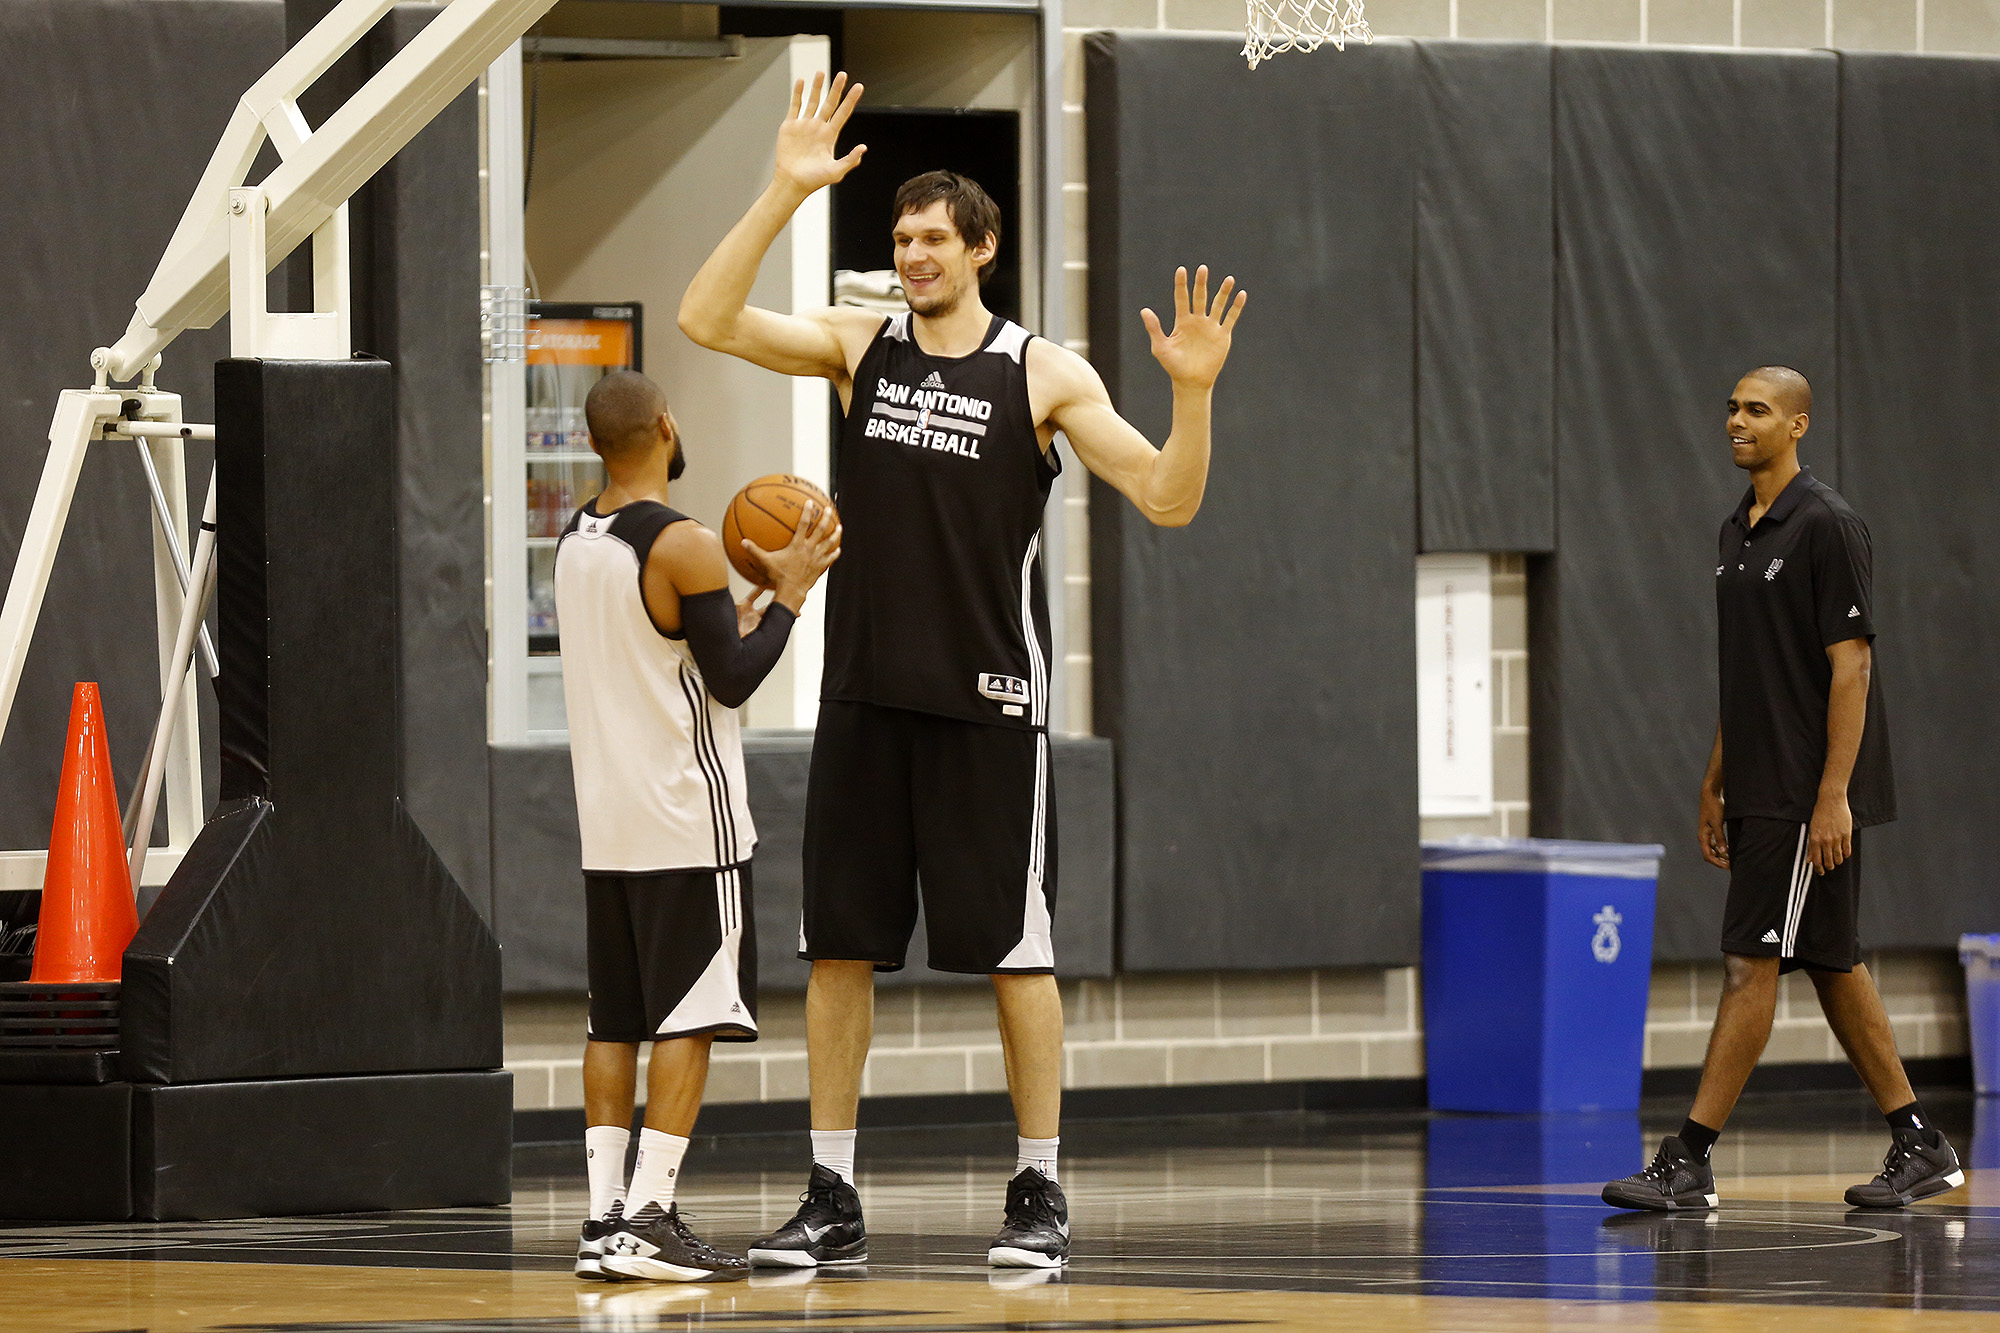 Boban Marjanovic scored a career-high 31 points and grabbed 17